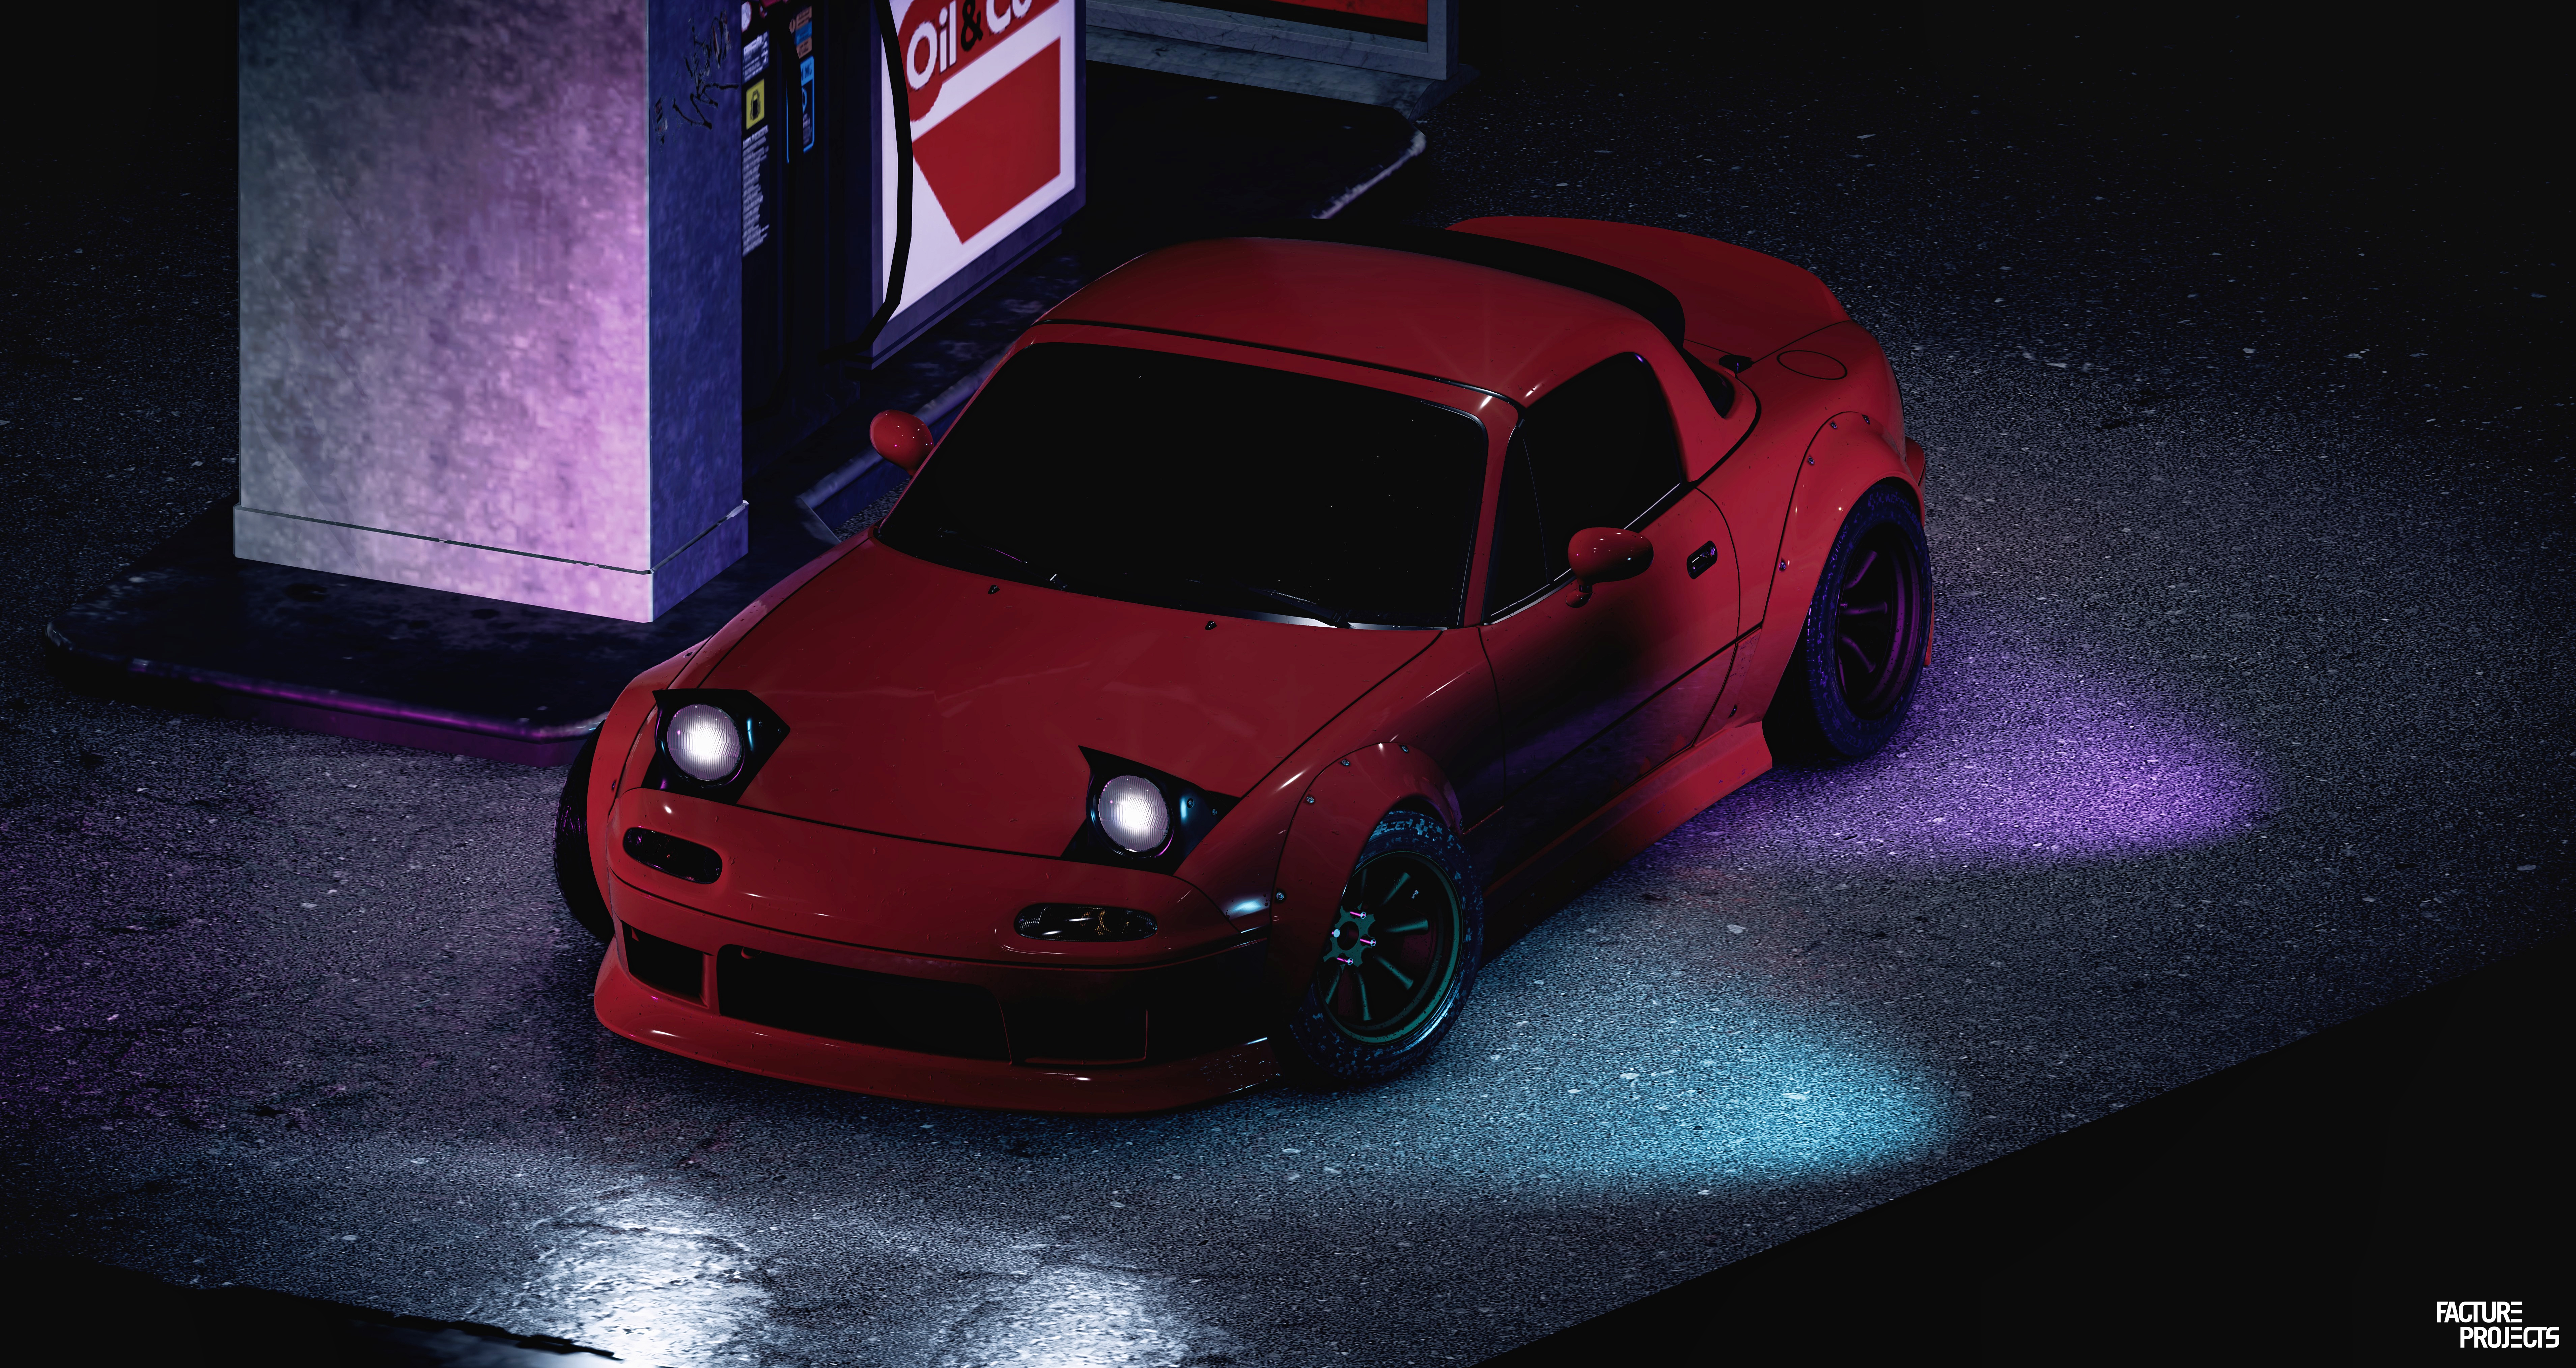 General 7636x4056 Mazda MX-5 Mazda red red cars Need for Speed 2015 Need for Speed screen shot pop-up headlights Japanese cars bodykit video games Electronic Arts Criterion Games